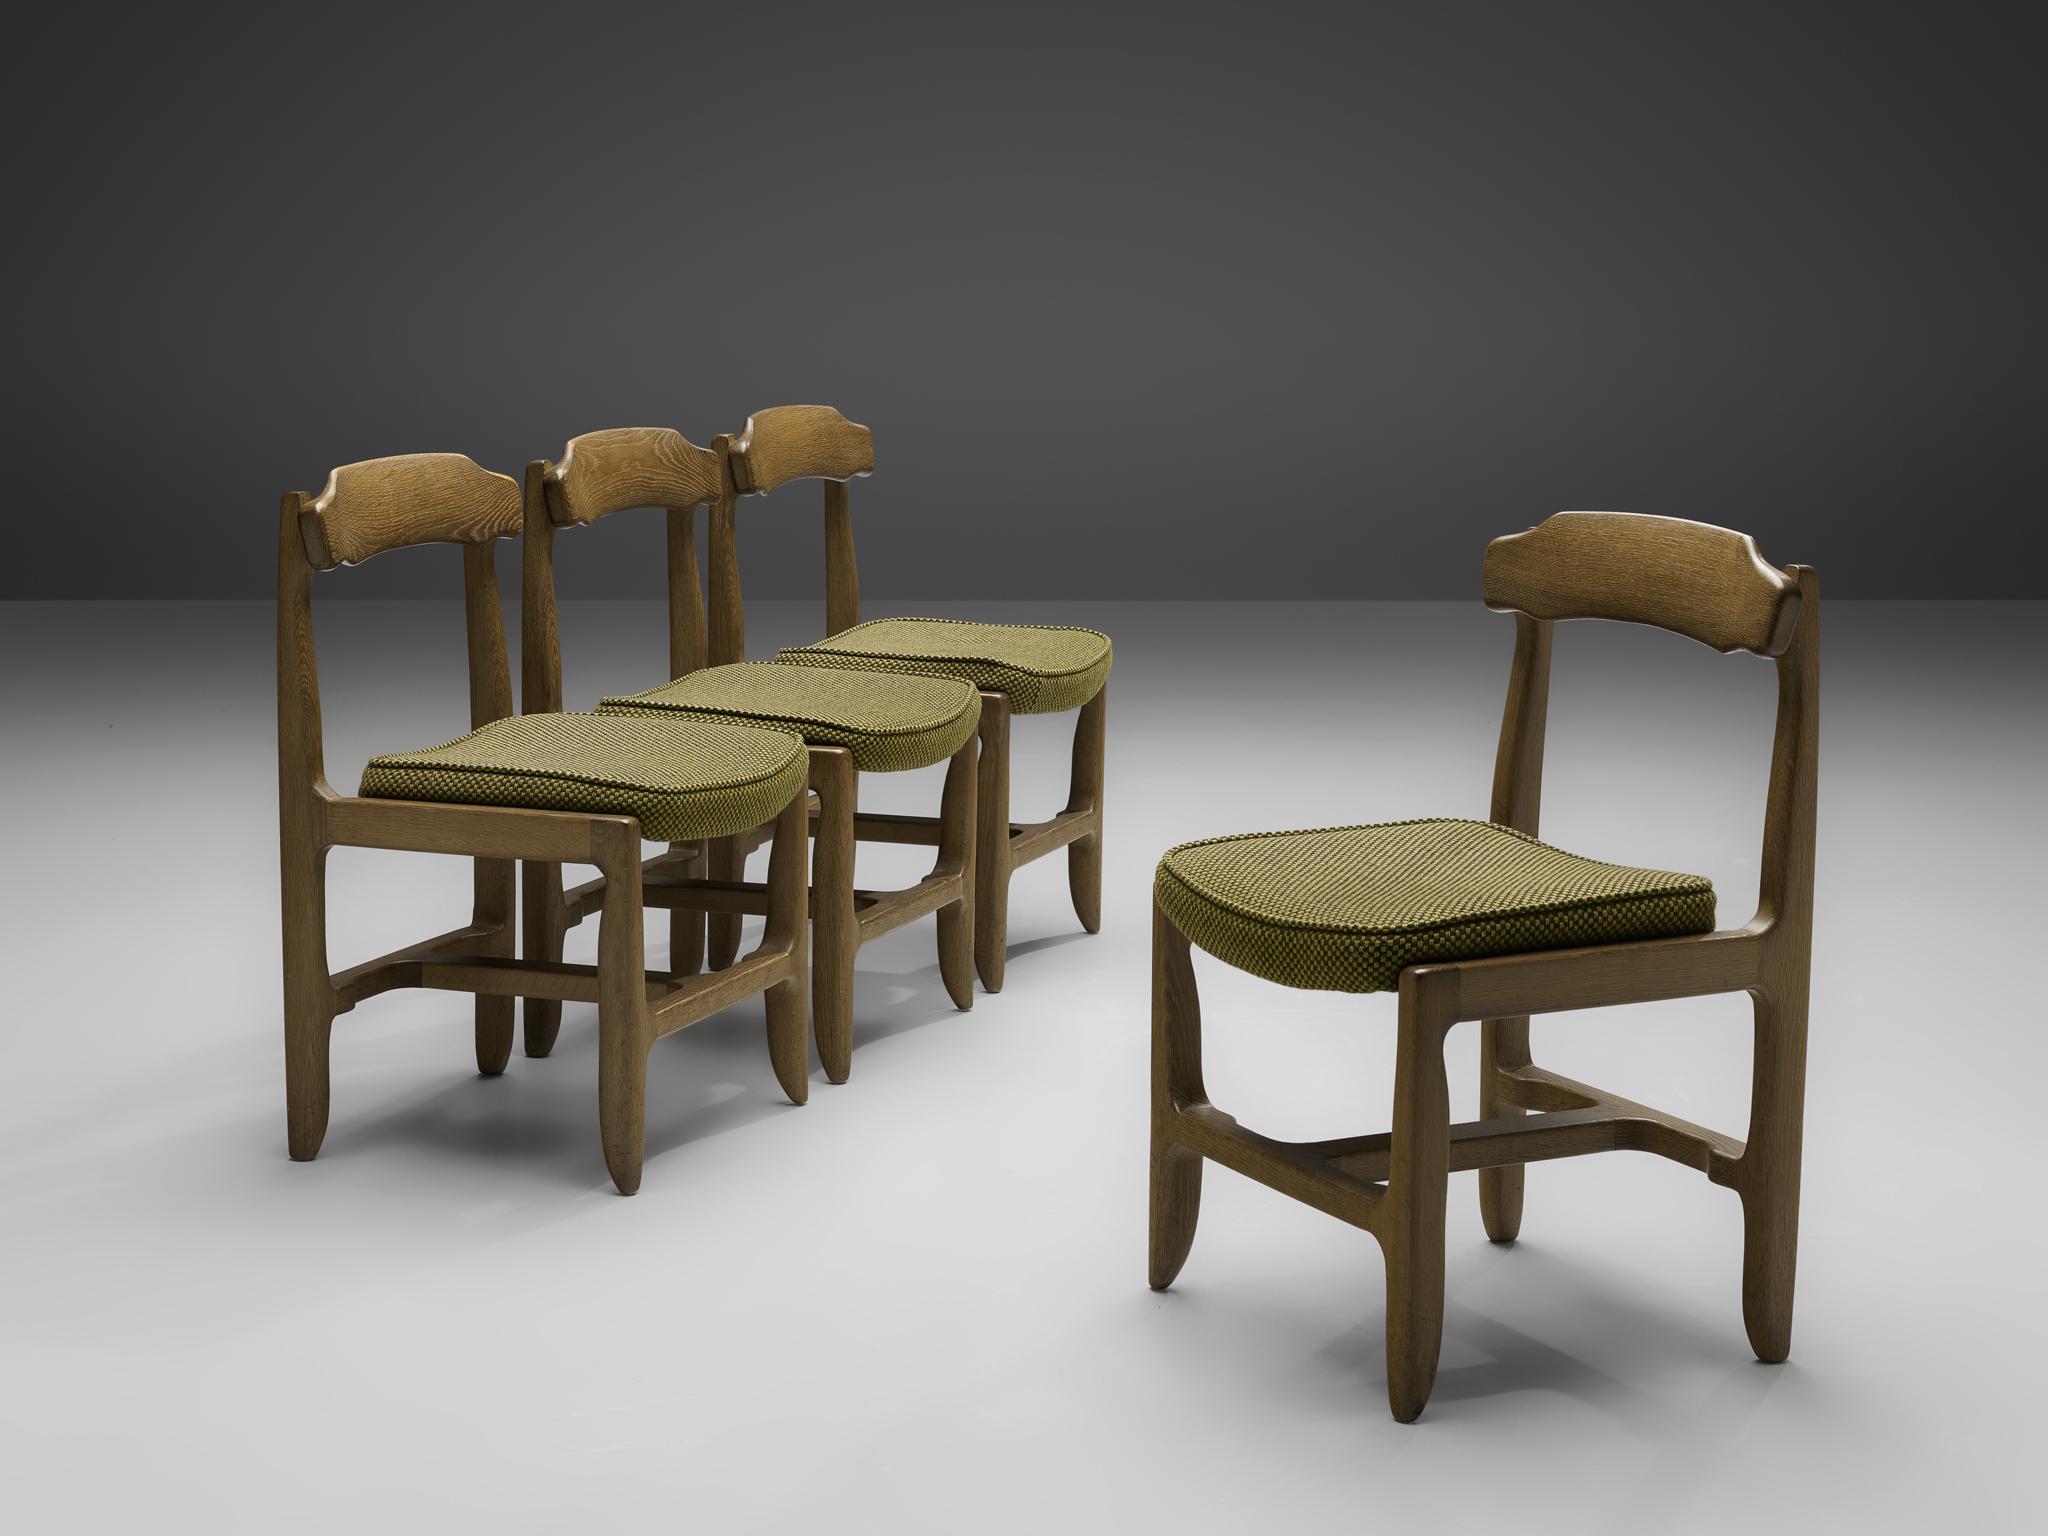 Guillerme et Chambron, set of four dining chairs, stained solid oak, fabric upholstery, France, 1960s.

These dining chairs in solid oak are designed by the French designer duo Jacques Chambron and Robert Guillerme. On four tapered legs rests the